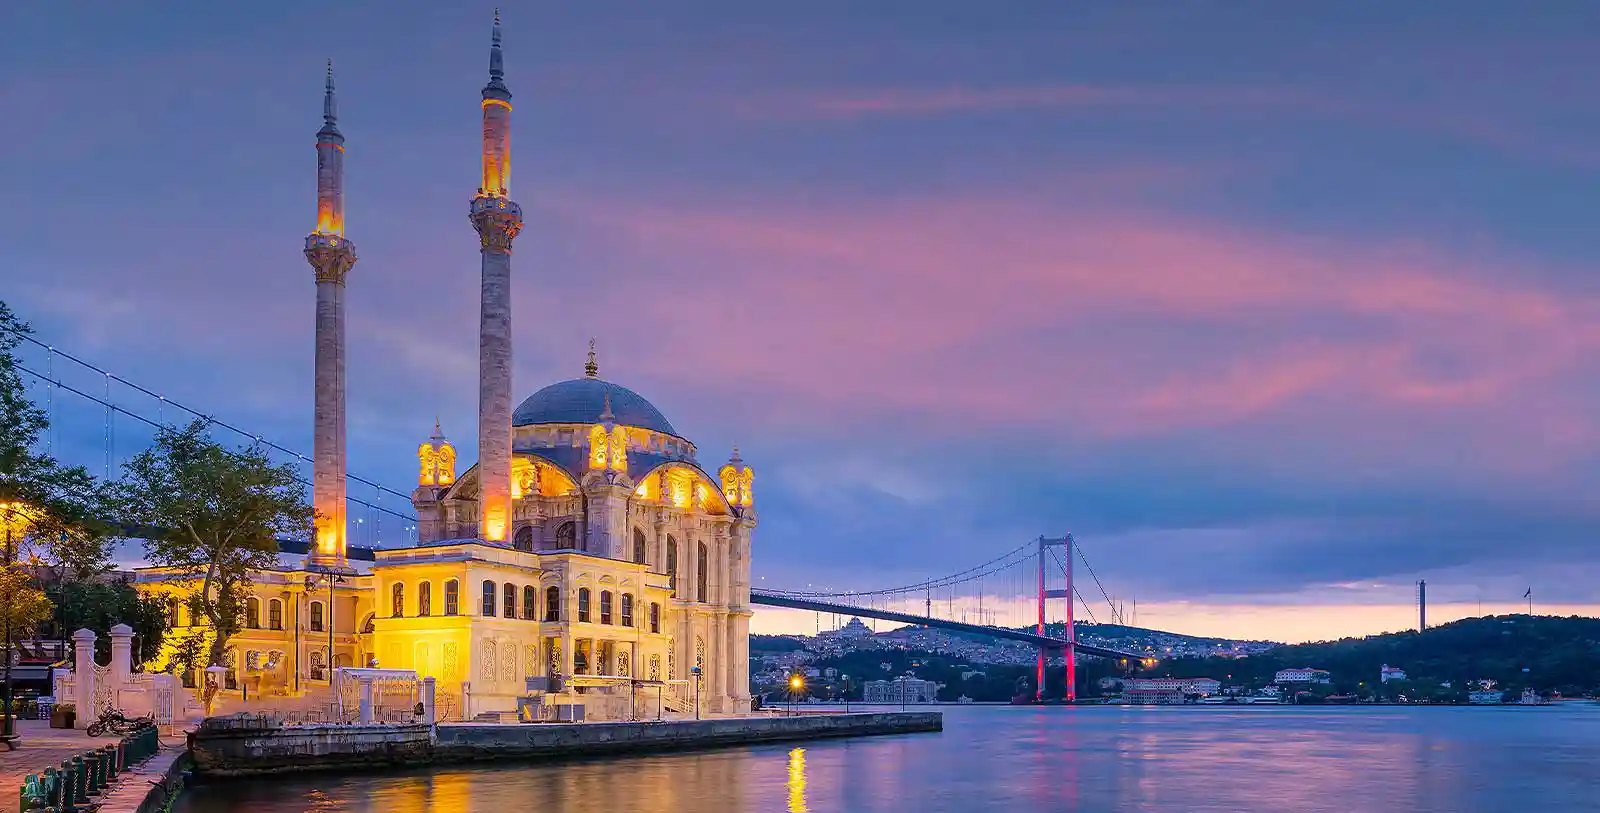 With Turkish citizenship and passport, you can experience life in a colorful country.